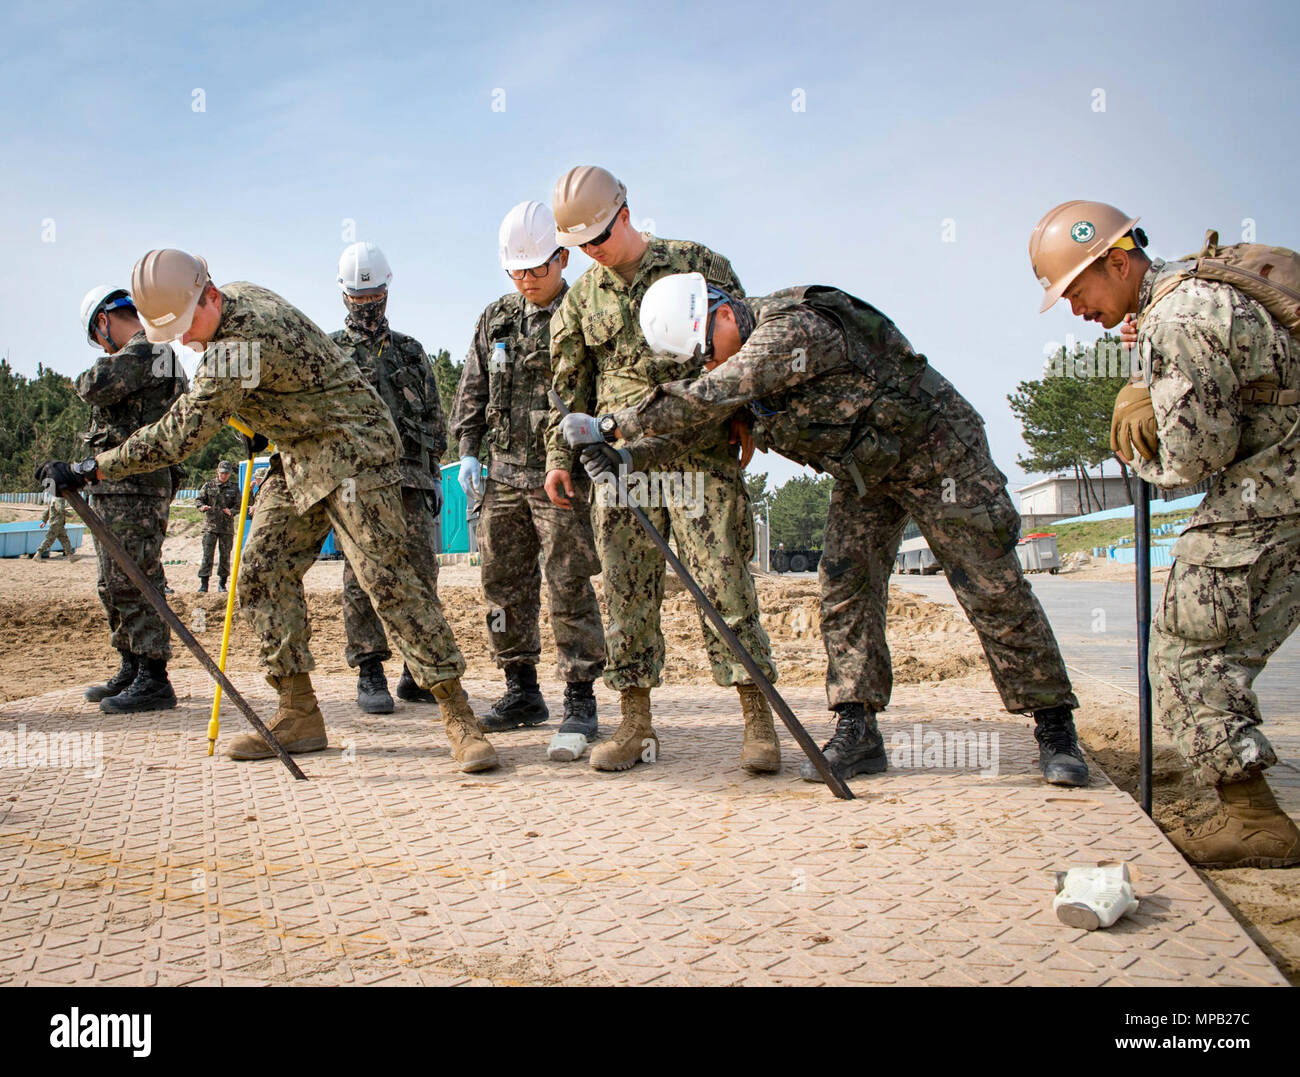 POHANG, Republic of Korea (April 8, 2017) – Seabees, attached to Amphibious Construction Battalion 1, and ROK Seabees, attached to Naval Mobile Construction Battalion 1, Naval Mobile Construction Squadron 53, align sections of durable matting during Operation Pacific Reach Exercise 2017 (OPRex17). OPRex17 is a bilateral training event designed to ensure readiness and sustain the ROK-U.S. Alliance by exercising an Area Distribution Center (ADC), an Air Terminal Supply Point (ATSP), Combined Joint Logistics Over-the-Shore (CJLOTS), and the use of rail, inland waterways, and coastal lift operatio Stock Photo